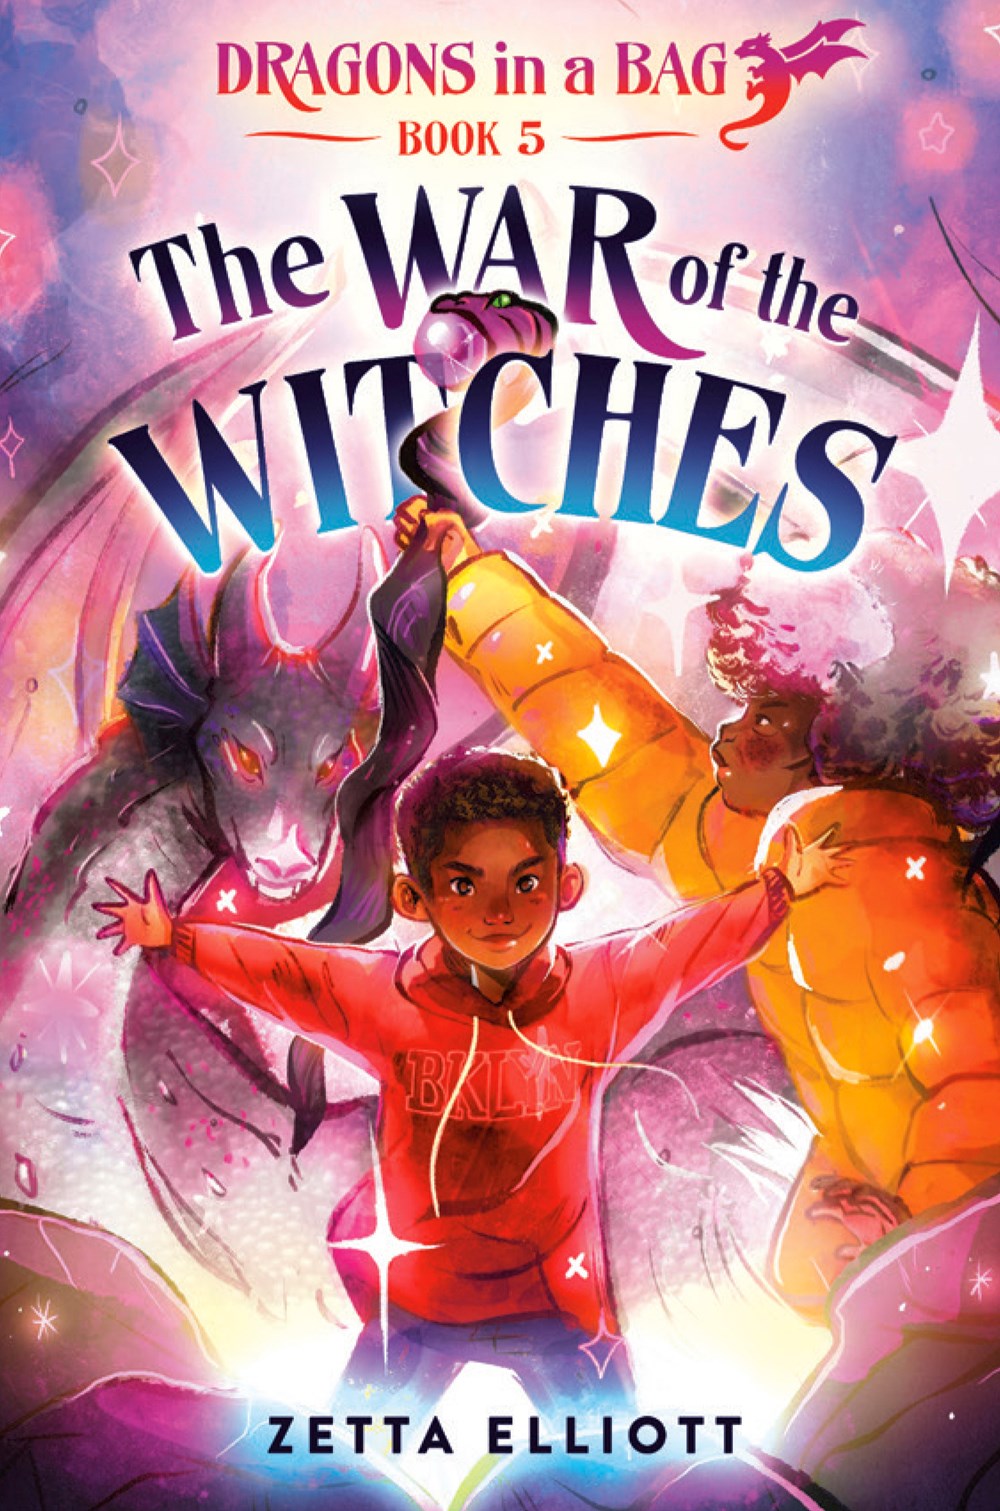 Cover of The War of the Witches by Zetta Elliott, illustrated by Cherise Harris